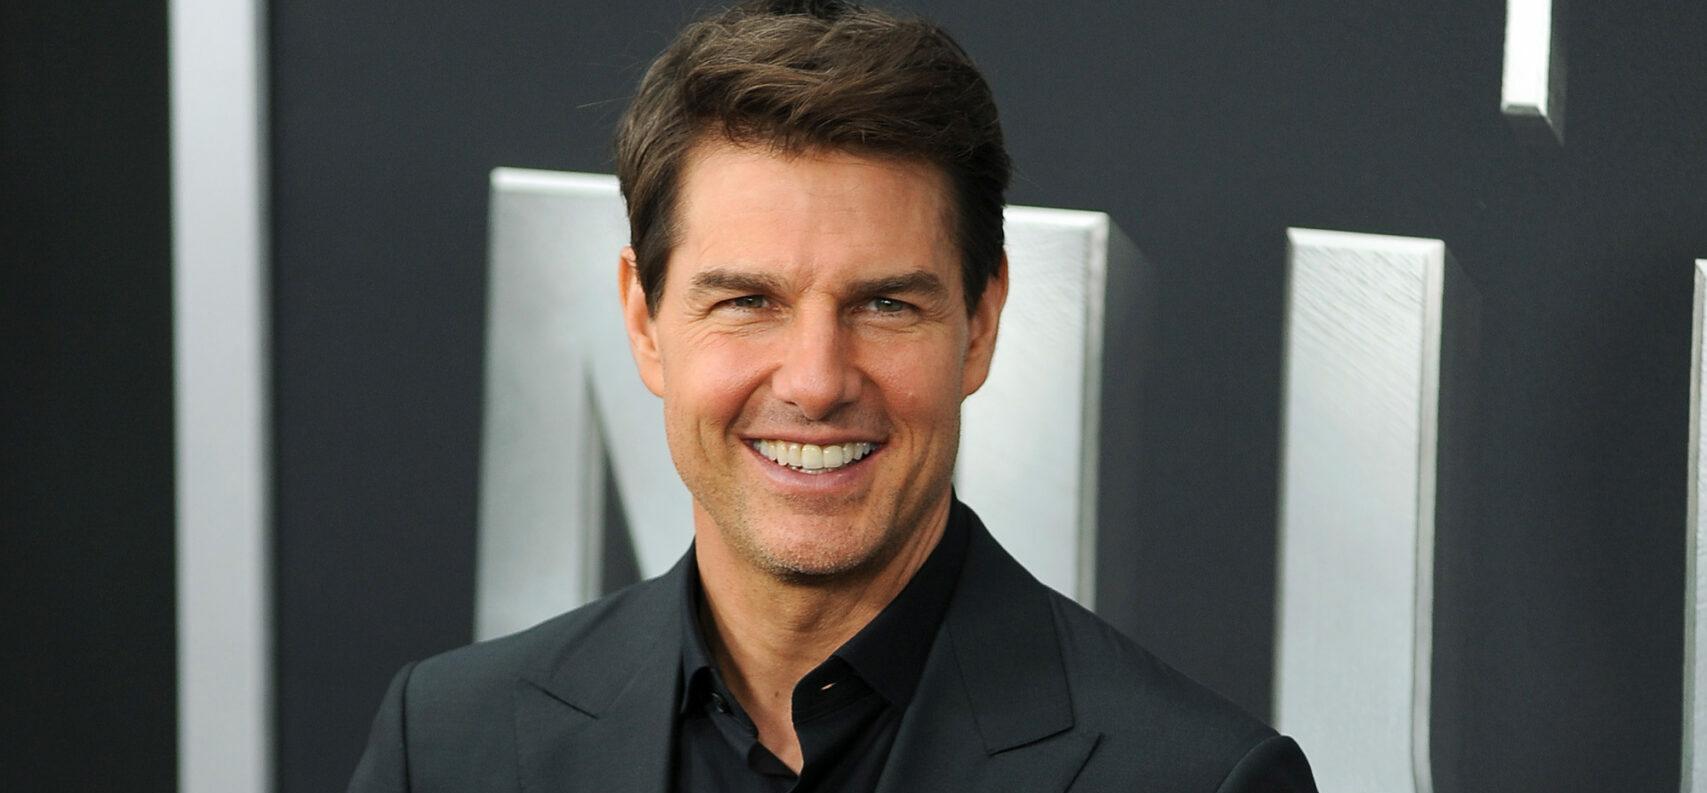 Tom Cruise Impersonator Believes In ‘Positive Output’ Of Deepfake Videos